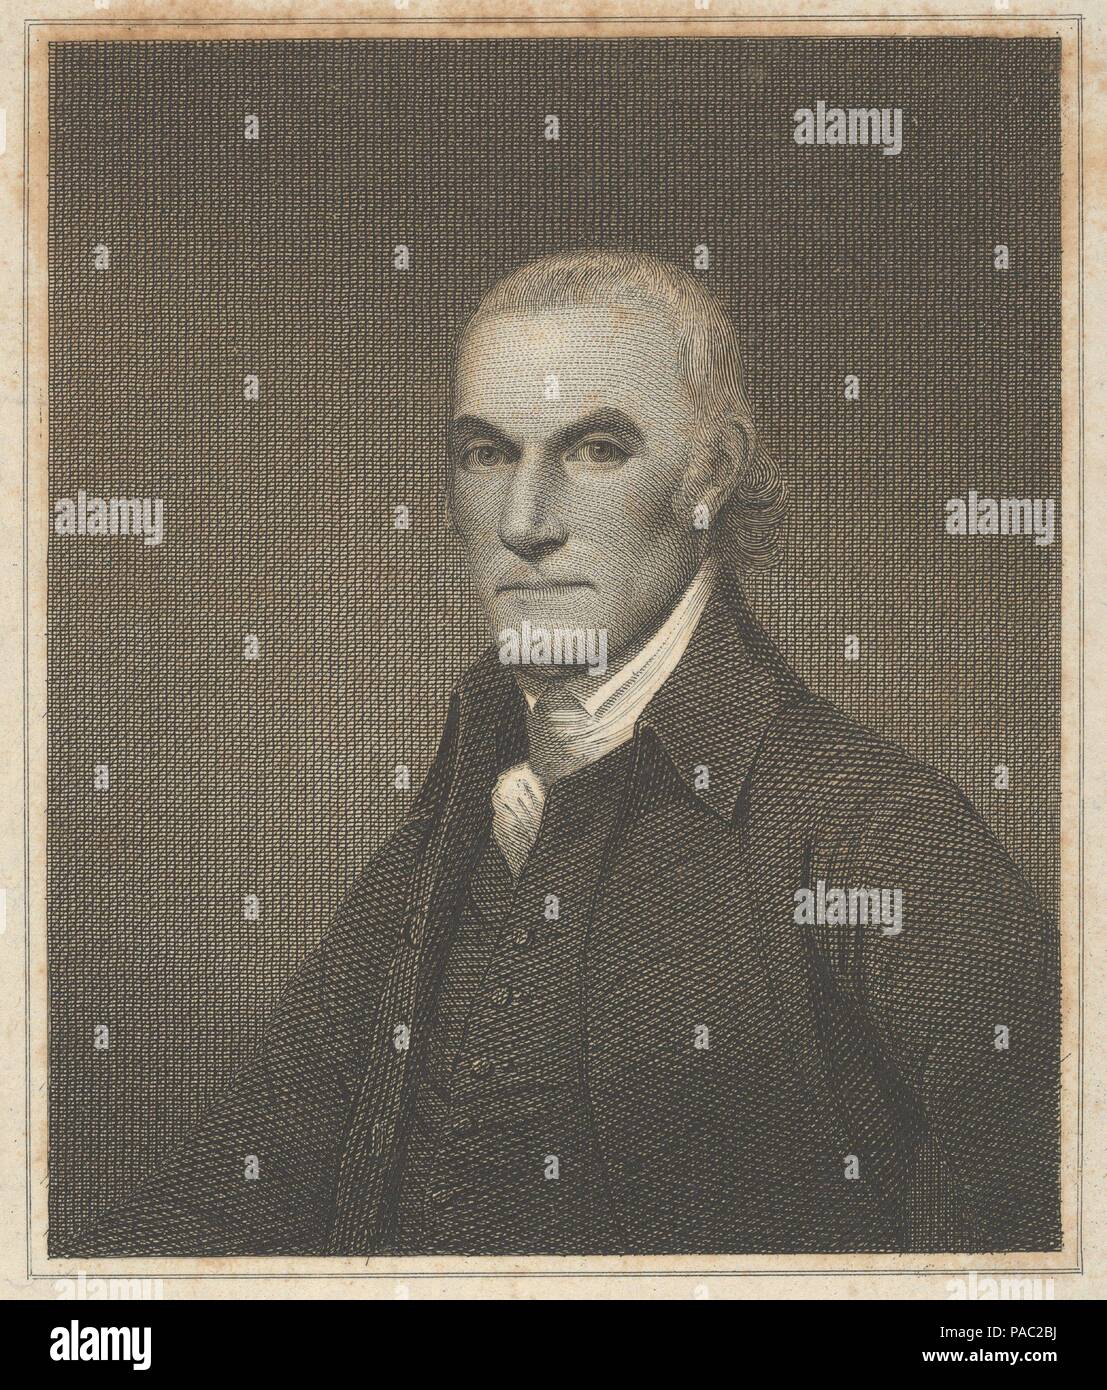 William Floyd. Artist: Asher Brown Durand (American, Jefferson, New Jersey 1796-1886 Maplewood, New Jersey); After Ralph Earl (American, Worcester County, Massachusetts 1751-1801 Bolton, Connecticut). Dimensions: image: 3 7/8 x 3 1/4 in. (9.8 x 8.3 cm). Sitter: William Floyd (American, 1734-1821). Date: 19th century. Museum: Metropolitan Museum of Art, New York, USA. Stock Photo